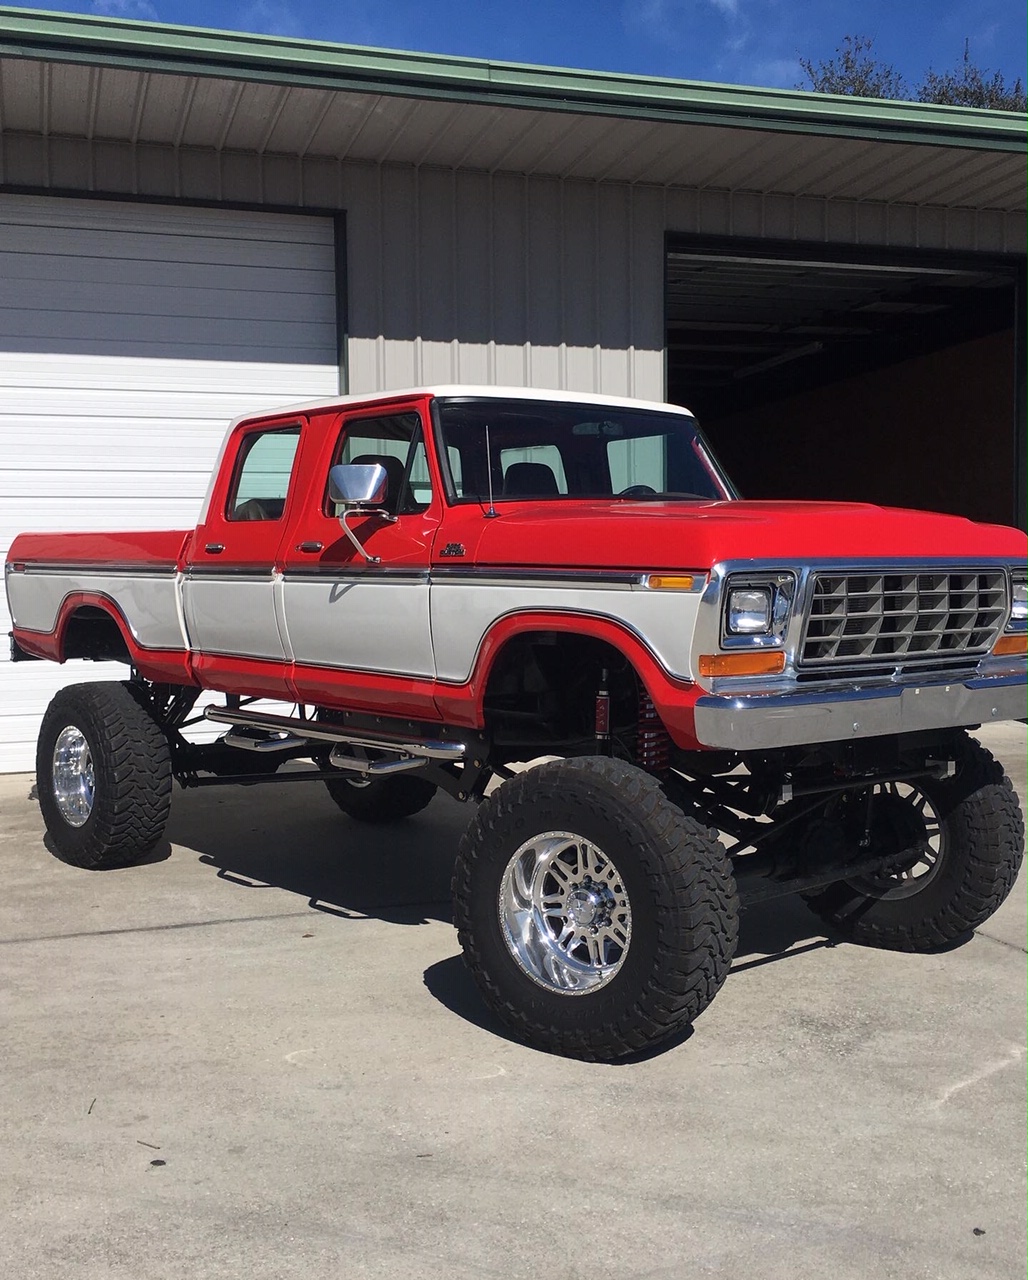 17 Year Old Built His Dream Truck 1977 Ford F250 Crew Cab 7.3L 8.jpeg